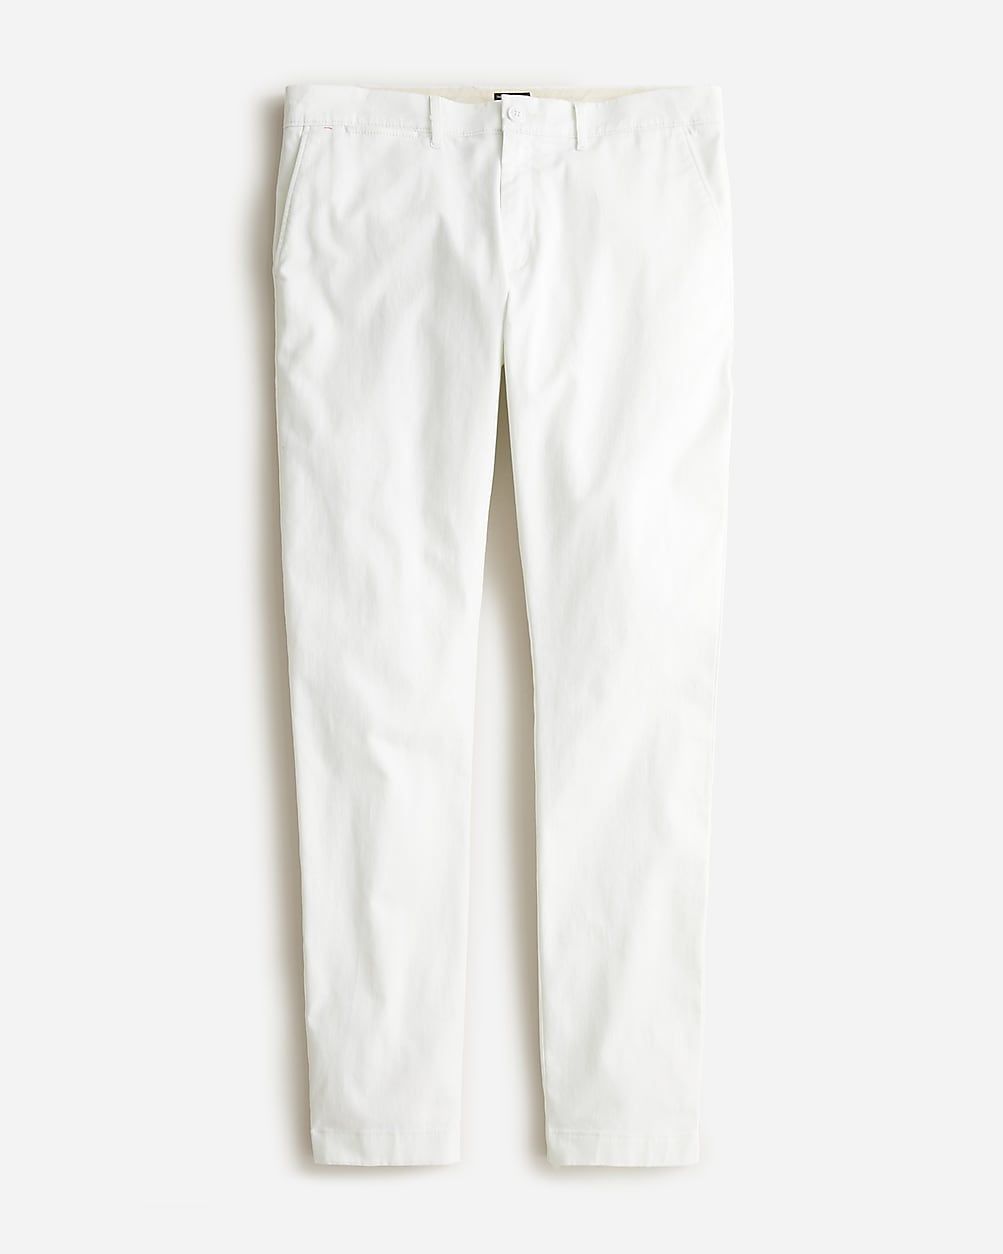 best seller4.3(170 REVIEWS)484 Slim-fit stretch chino pant$89.50Select Colors$71.99White$89.50$89... | J.Crew US